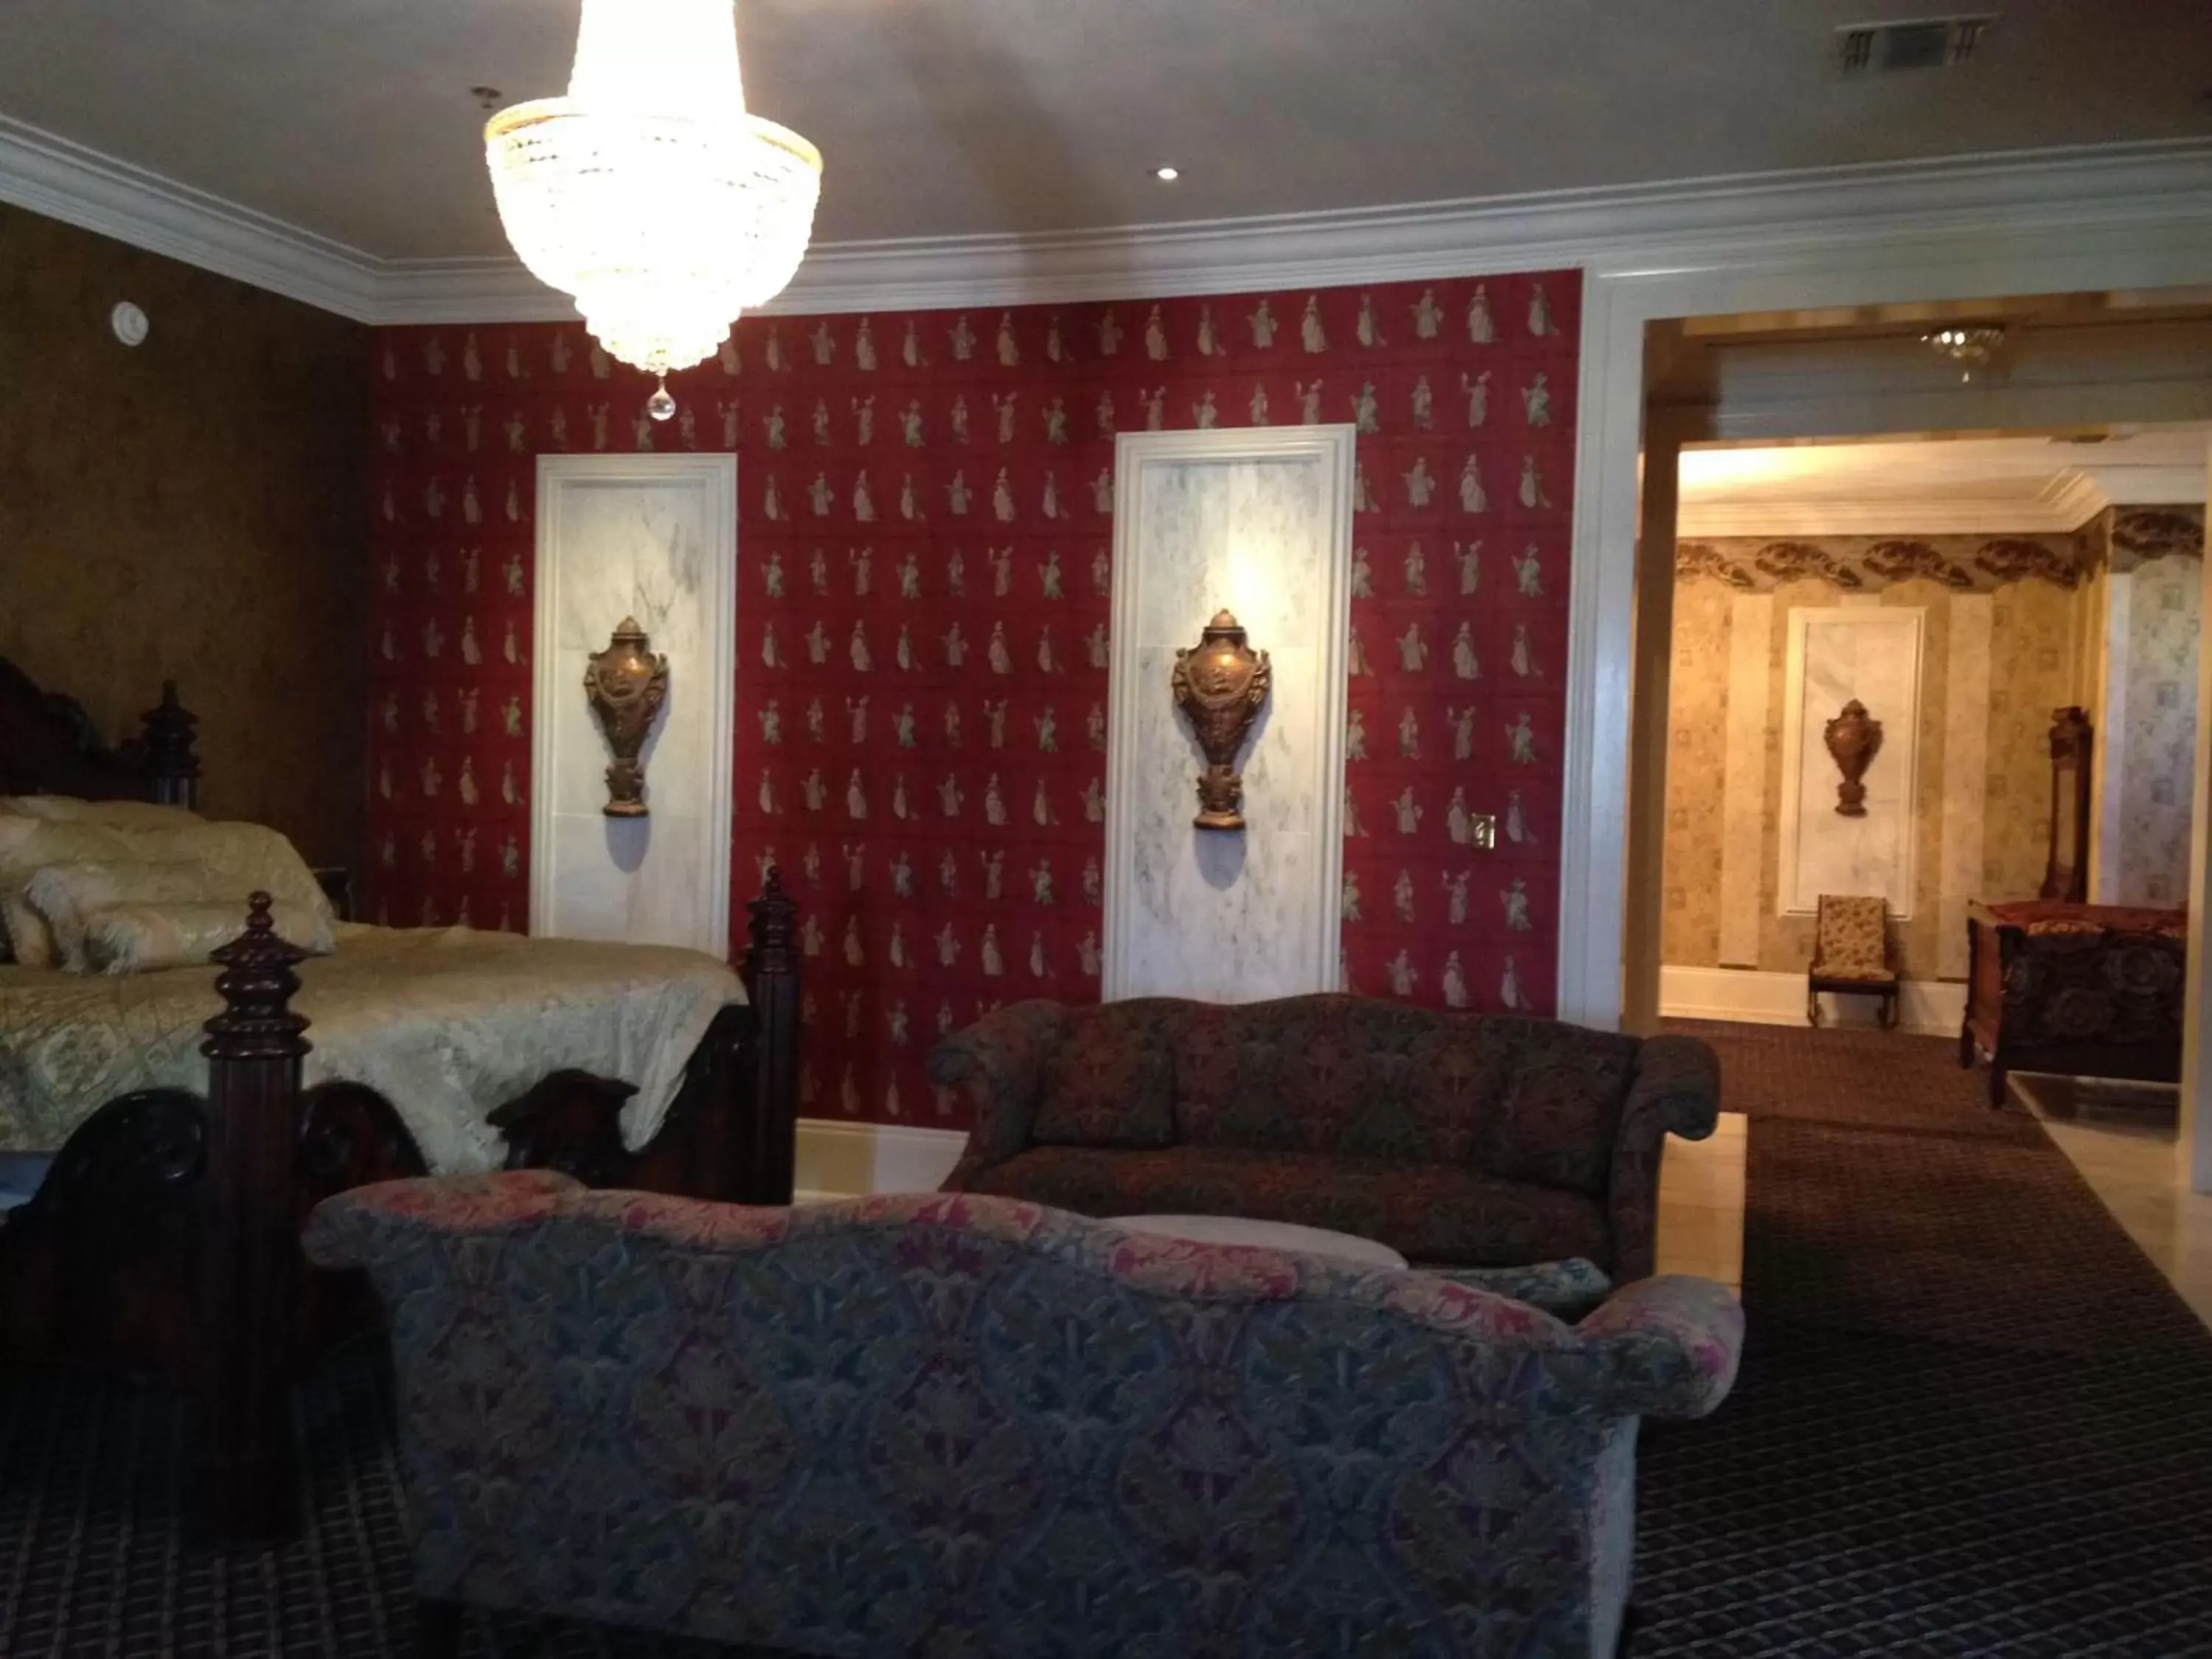 Governor's Family Suite in Dansereau House